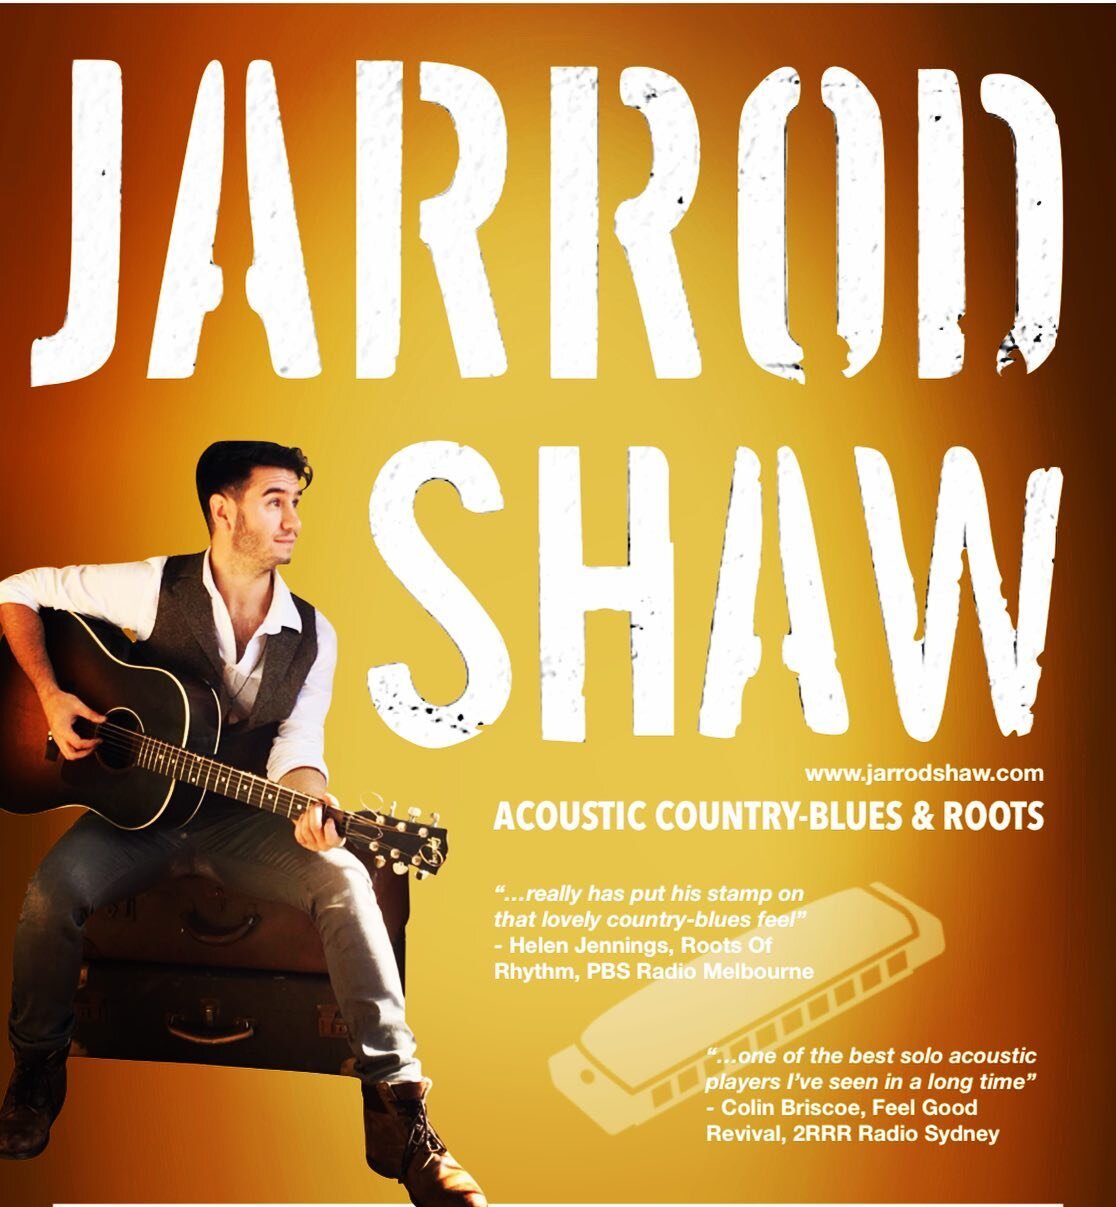 SupperClub Friday Presents: Jarrod Shaw

FRIDAY,  AUGUST 26th. 2022

Tickets: Palais-Hepburn.com

Dinner &amp; Show:  Limited Tickets available, Guaranteed front seating.

Genre: Blues / Country / Folk

ABOUT: Jarrod Shaw possesses a passion and appr